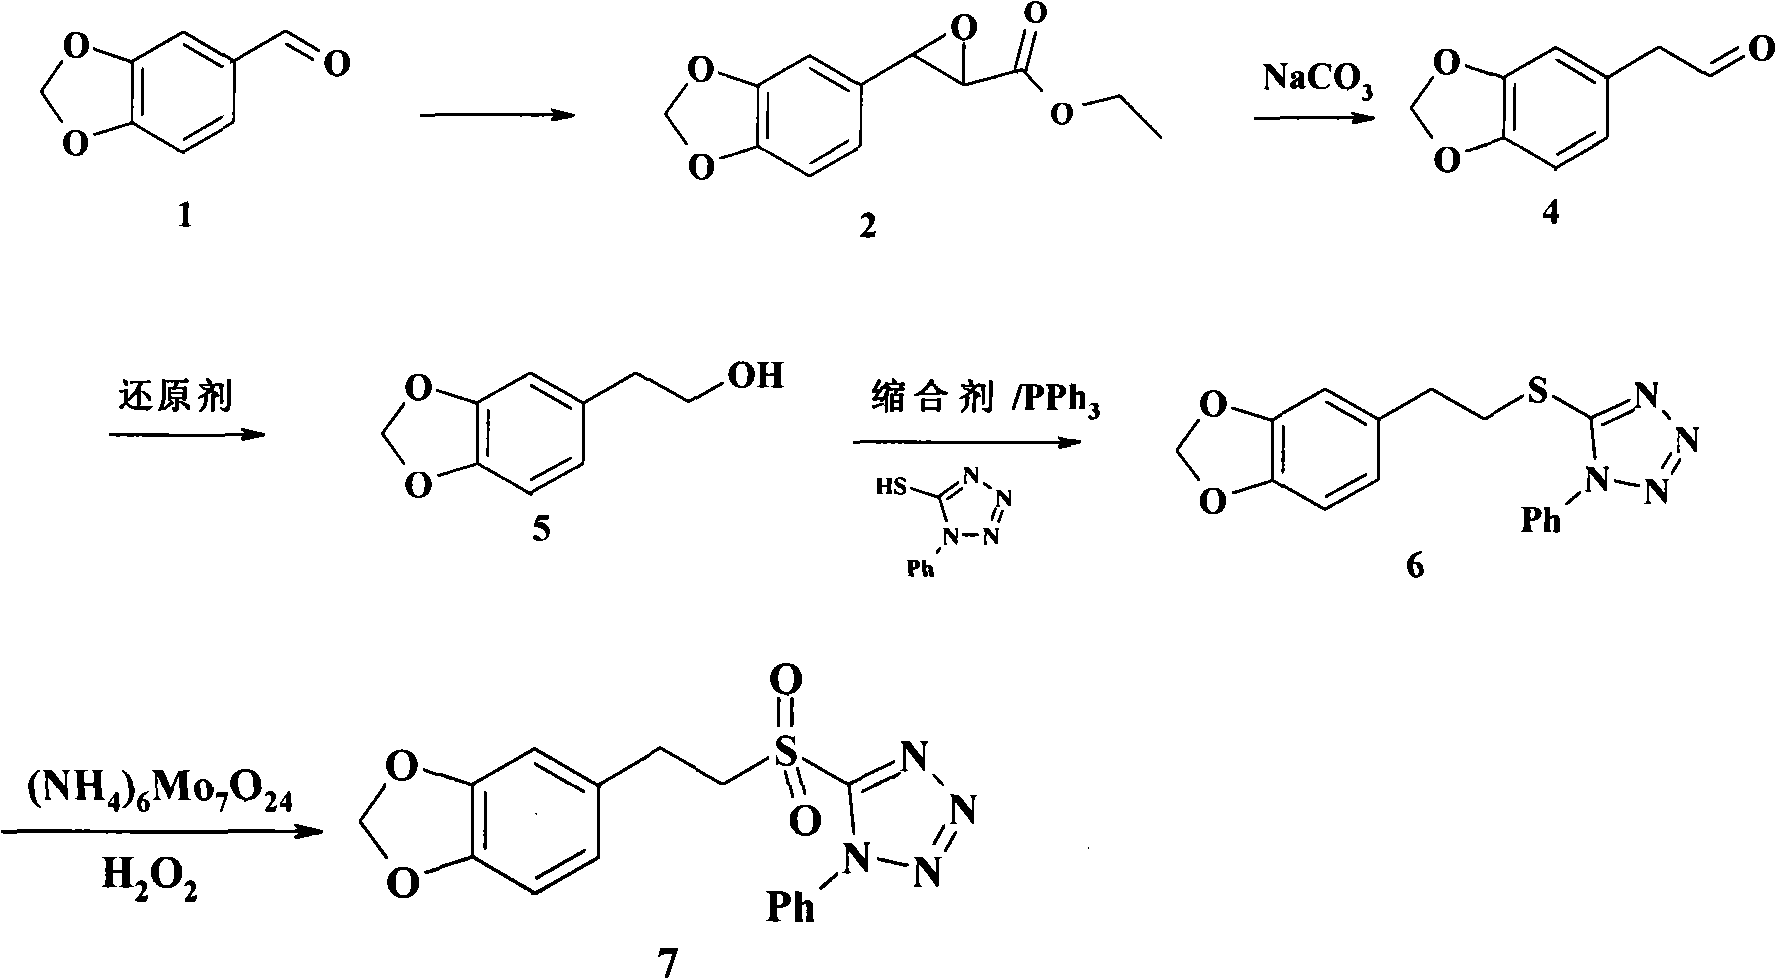 Chemical synthesis method of laetispicine